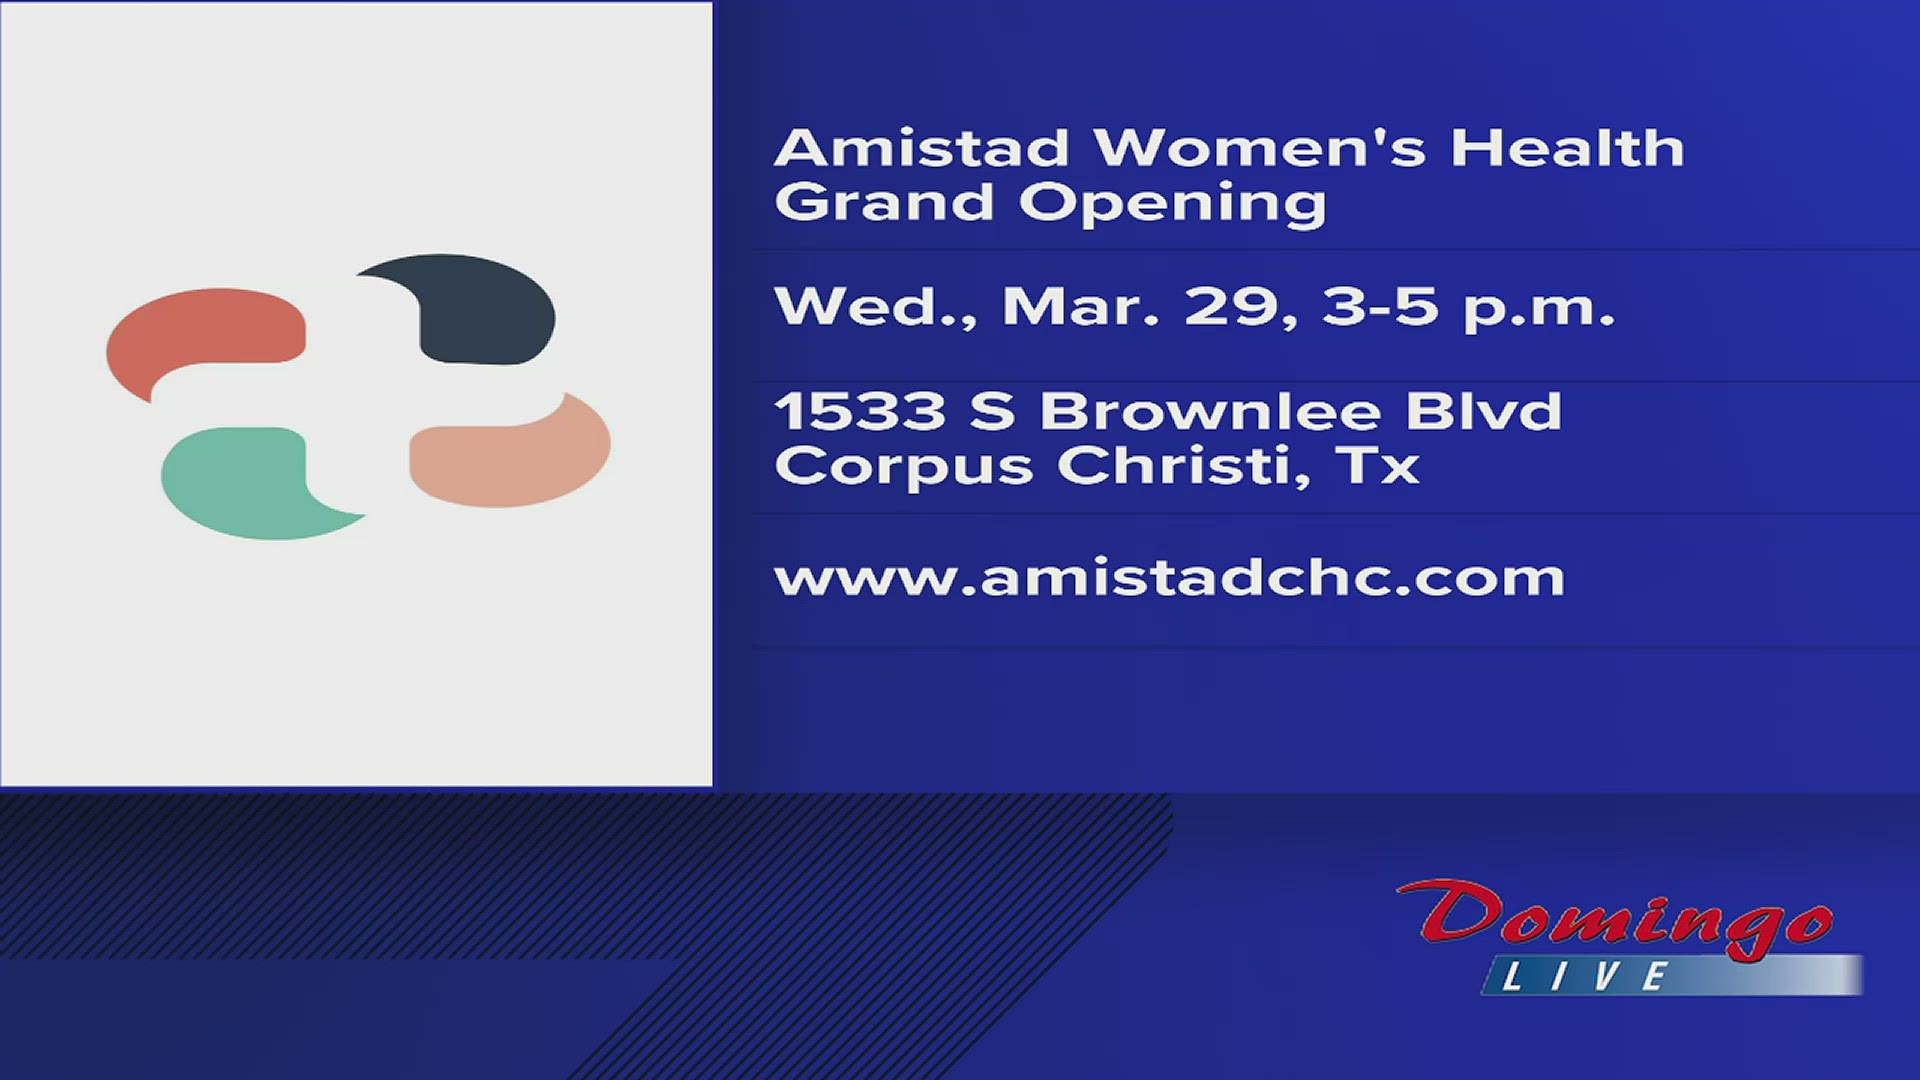 Dr. Baggerman and Dr. Weisenburger joined us live to invite the public to the grand opening of Corpus Christi's new Amistad Women's Health Center.